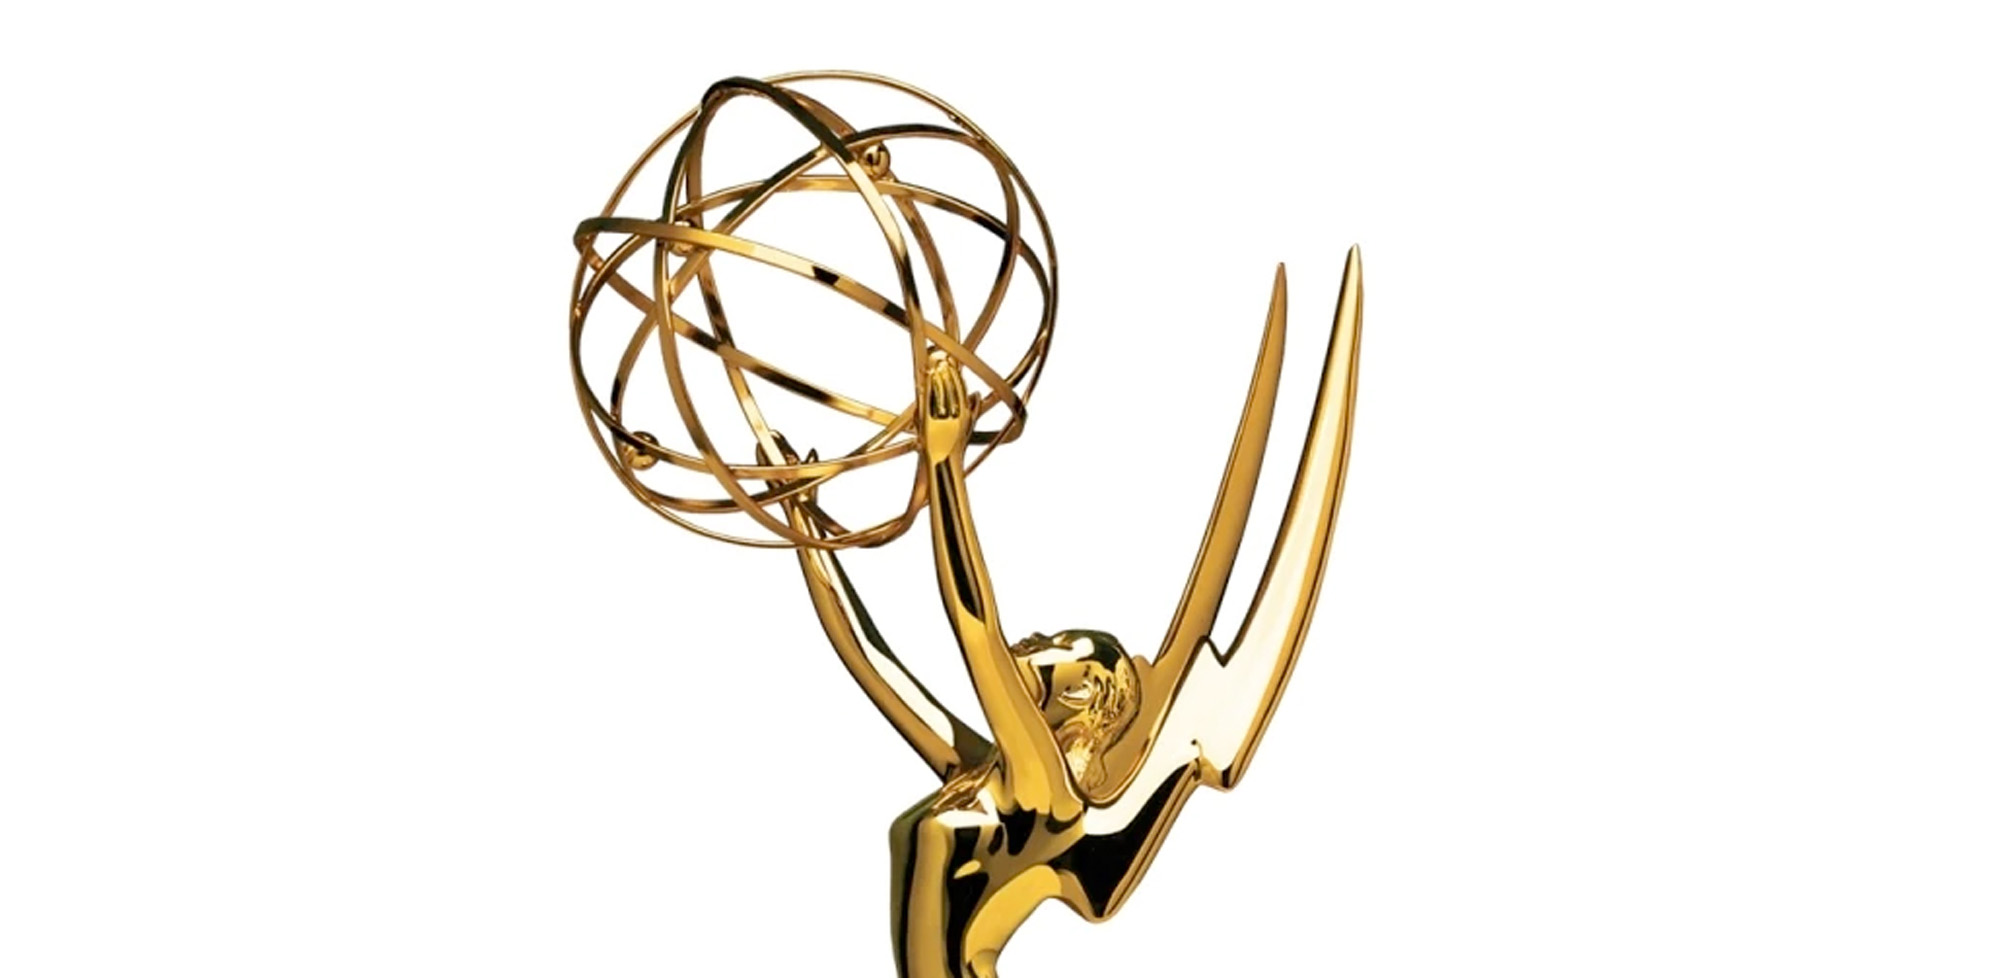 Emmy (Academy of Television Arts & Sciences)